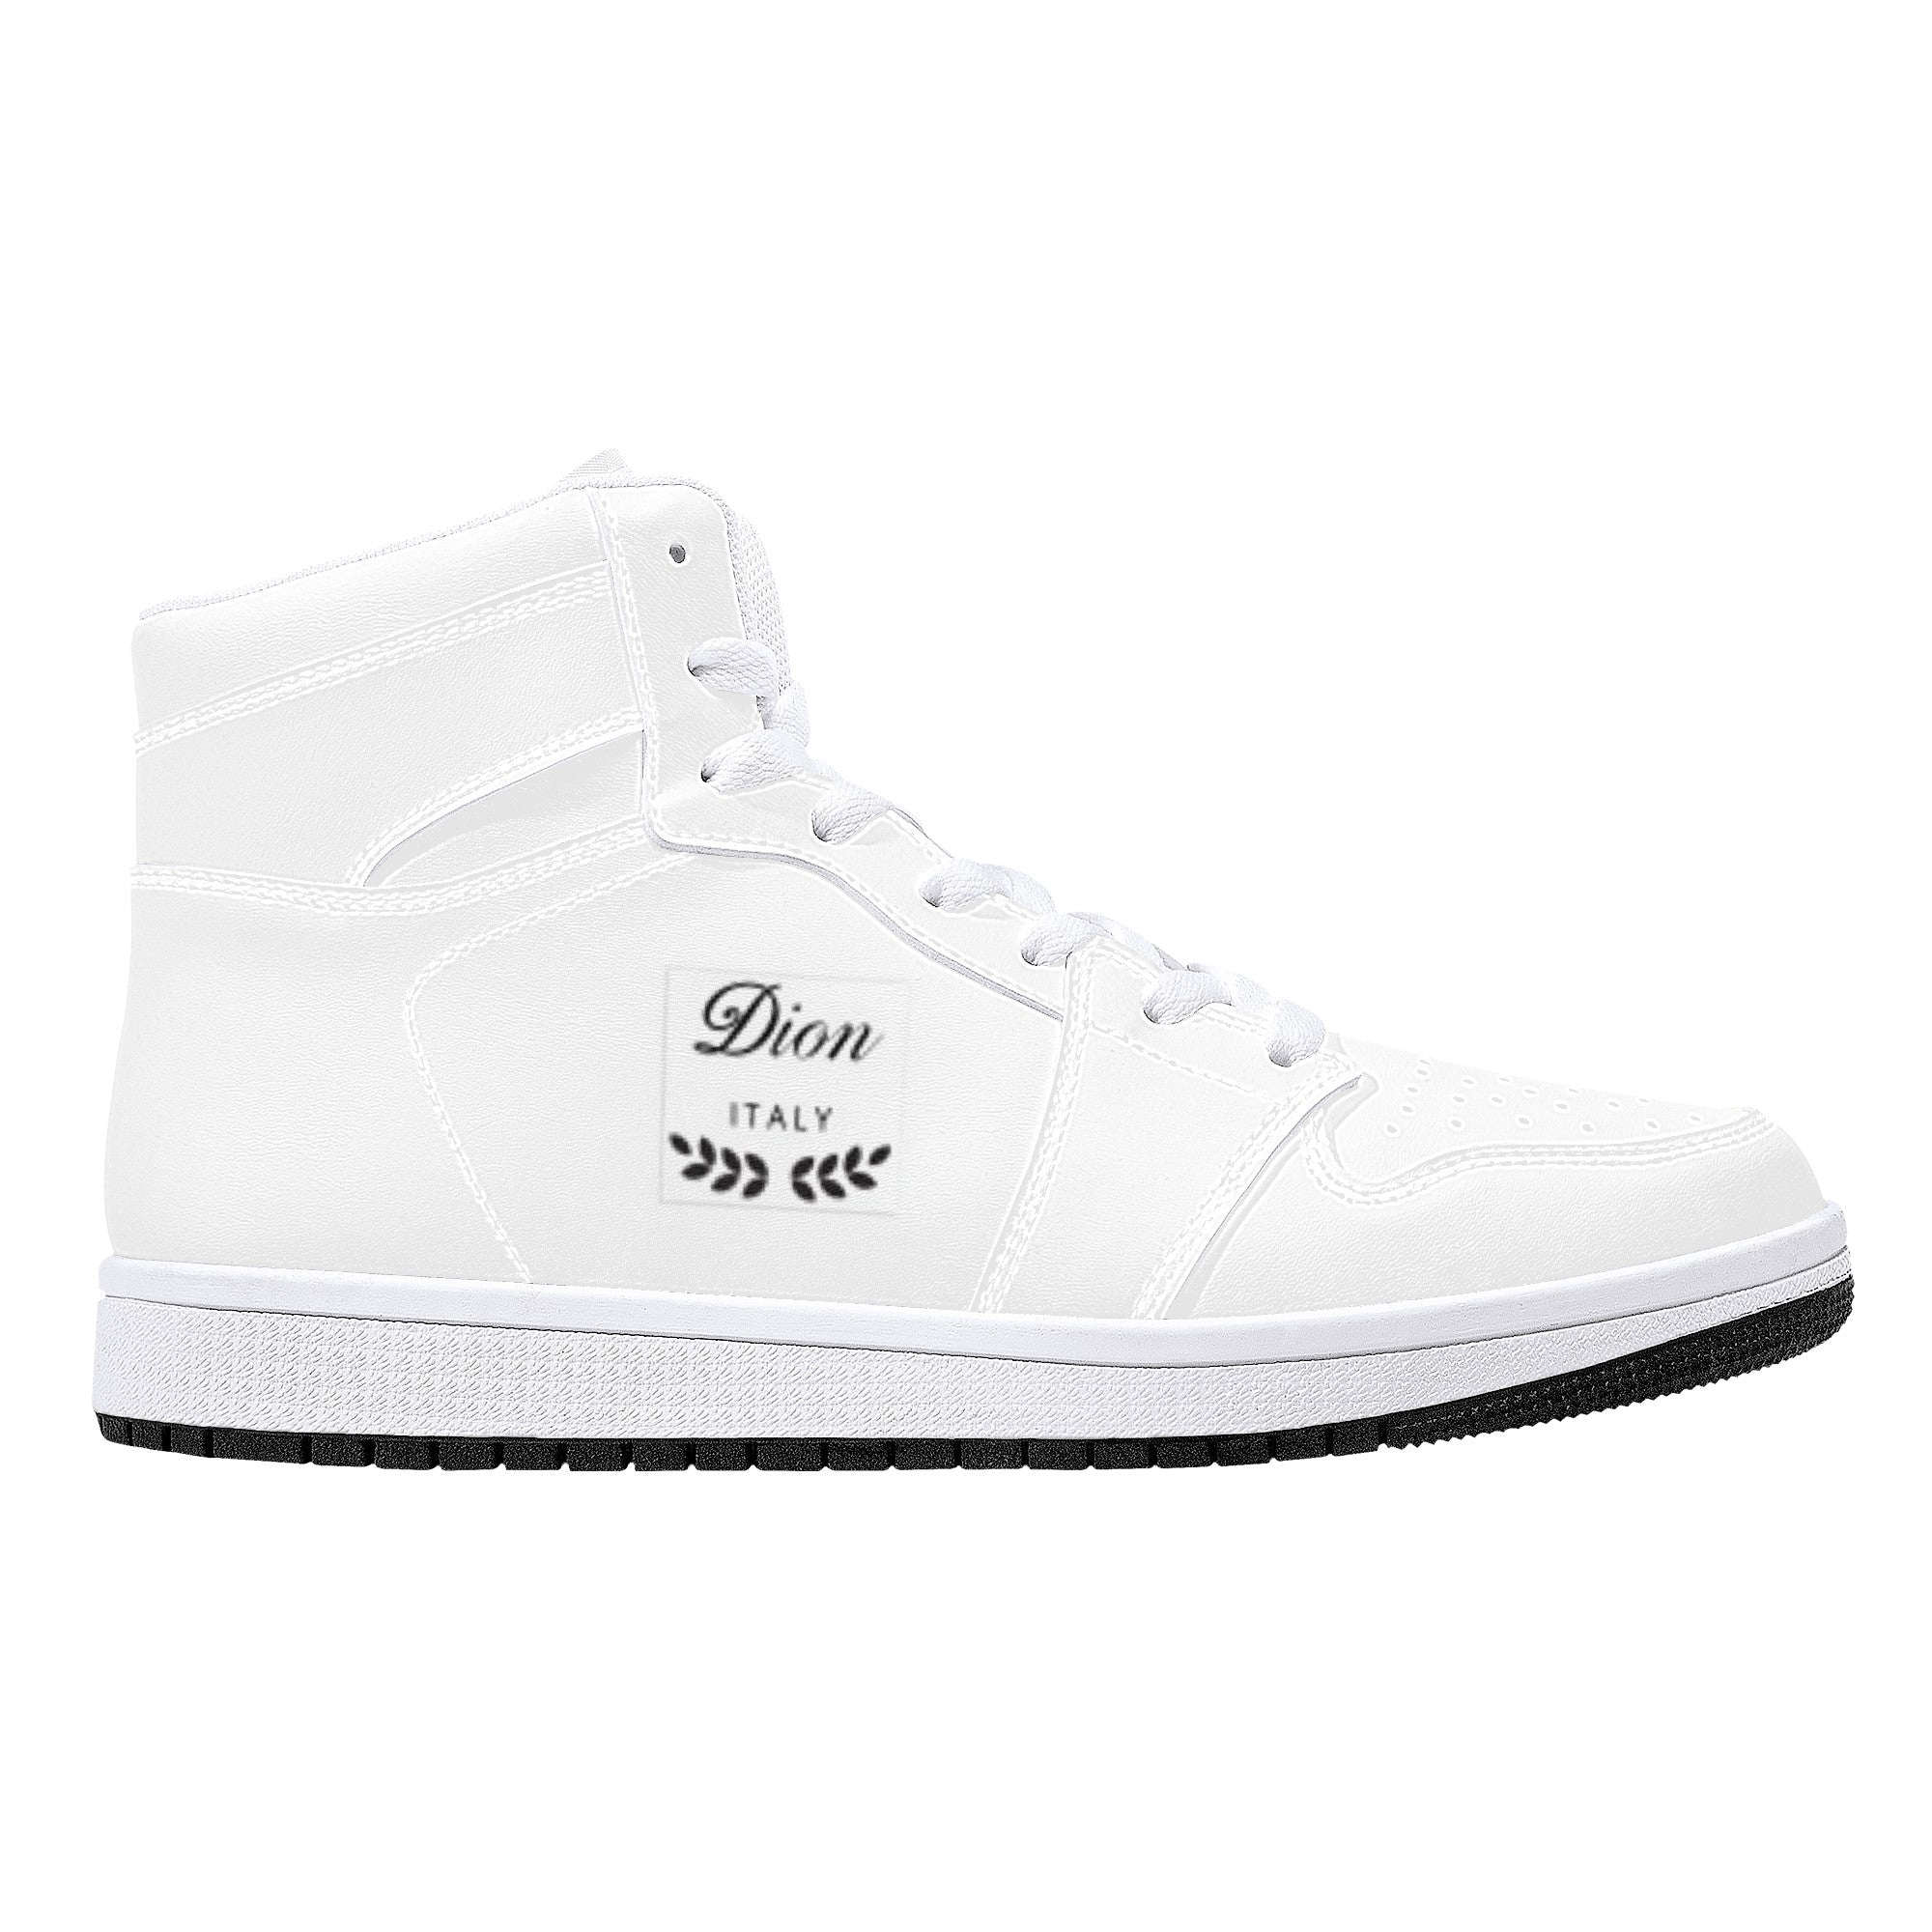 Dion Italy - High Top | Custom Branded Company Shoes | Shoe Zero